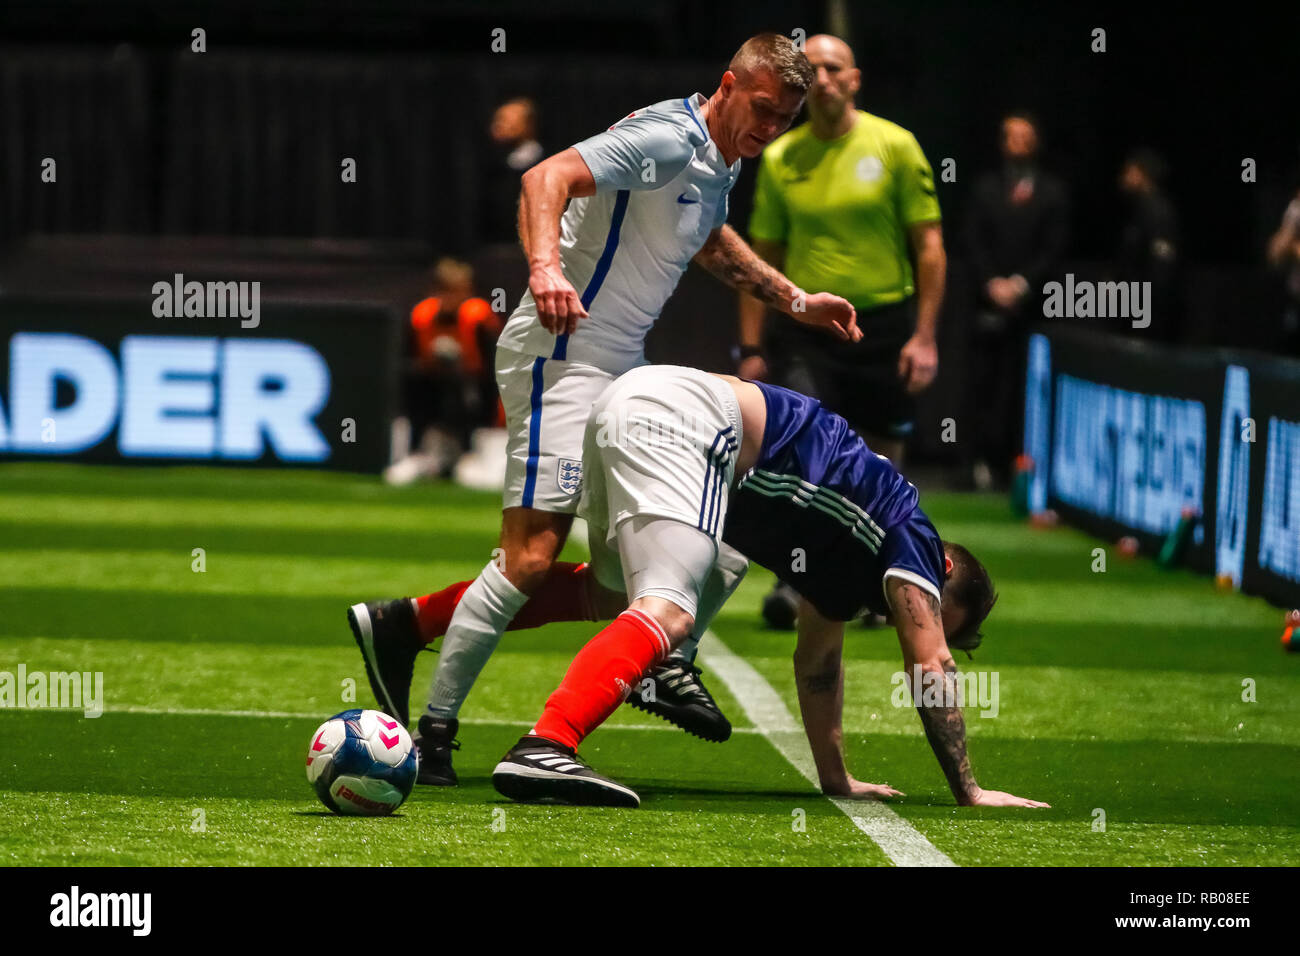 Glasgow, UK. 5th Jan 2019. Action from Day 2 of the FansBet Star Sixes Tournament at the SSE Hydro in Glasgow.    Game 6 - England Vs Scotland Both Paul Konchesky (ENG) & James McFadden (SCO) were determined not to loose the ball during the Star Sixes Tournament in Glasgow Credit: Colin Poultney/Alamy Live News Stock Photo